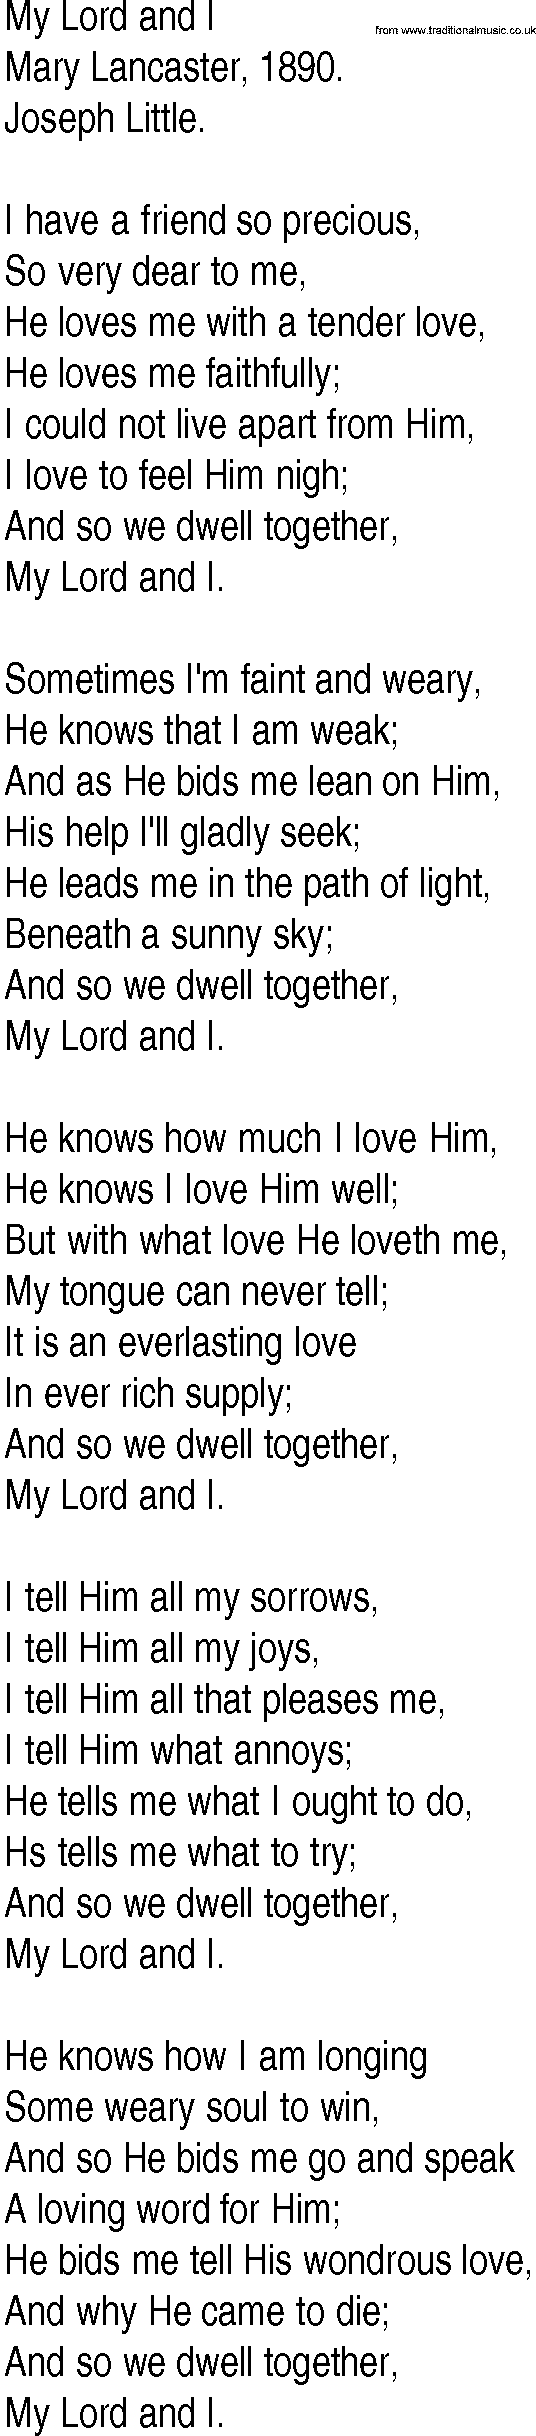 Hymn and Gospel Song: My Lord and I by Mary Lancaster lyrics